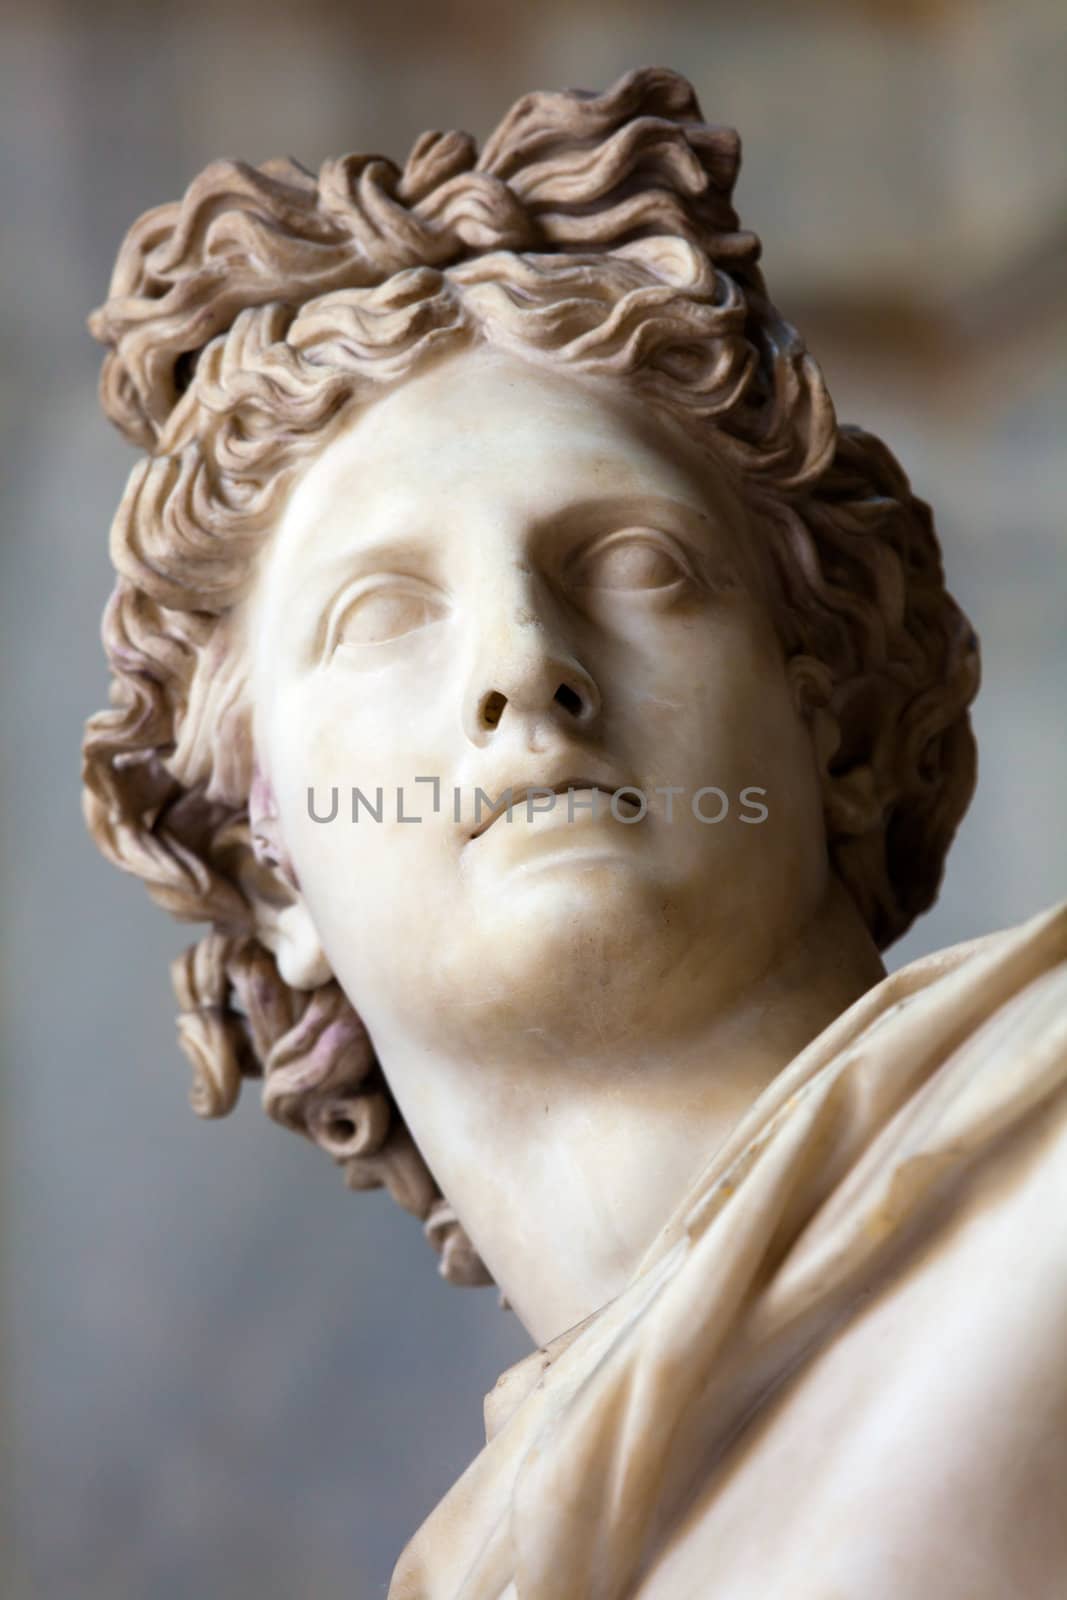 This sculpture is marble copy of lost bronze original made by Greek sculptor Leochares. Exposed in Vatican Museum, Rome, Italy